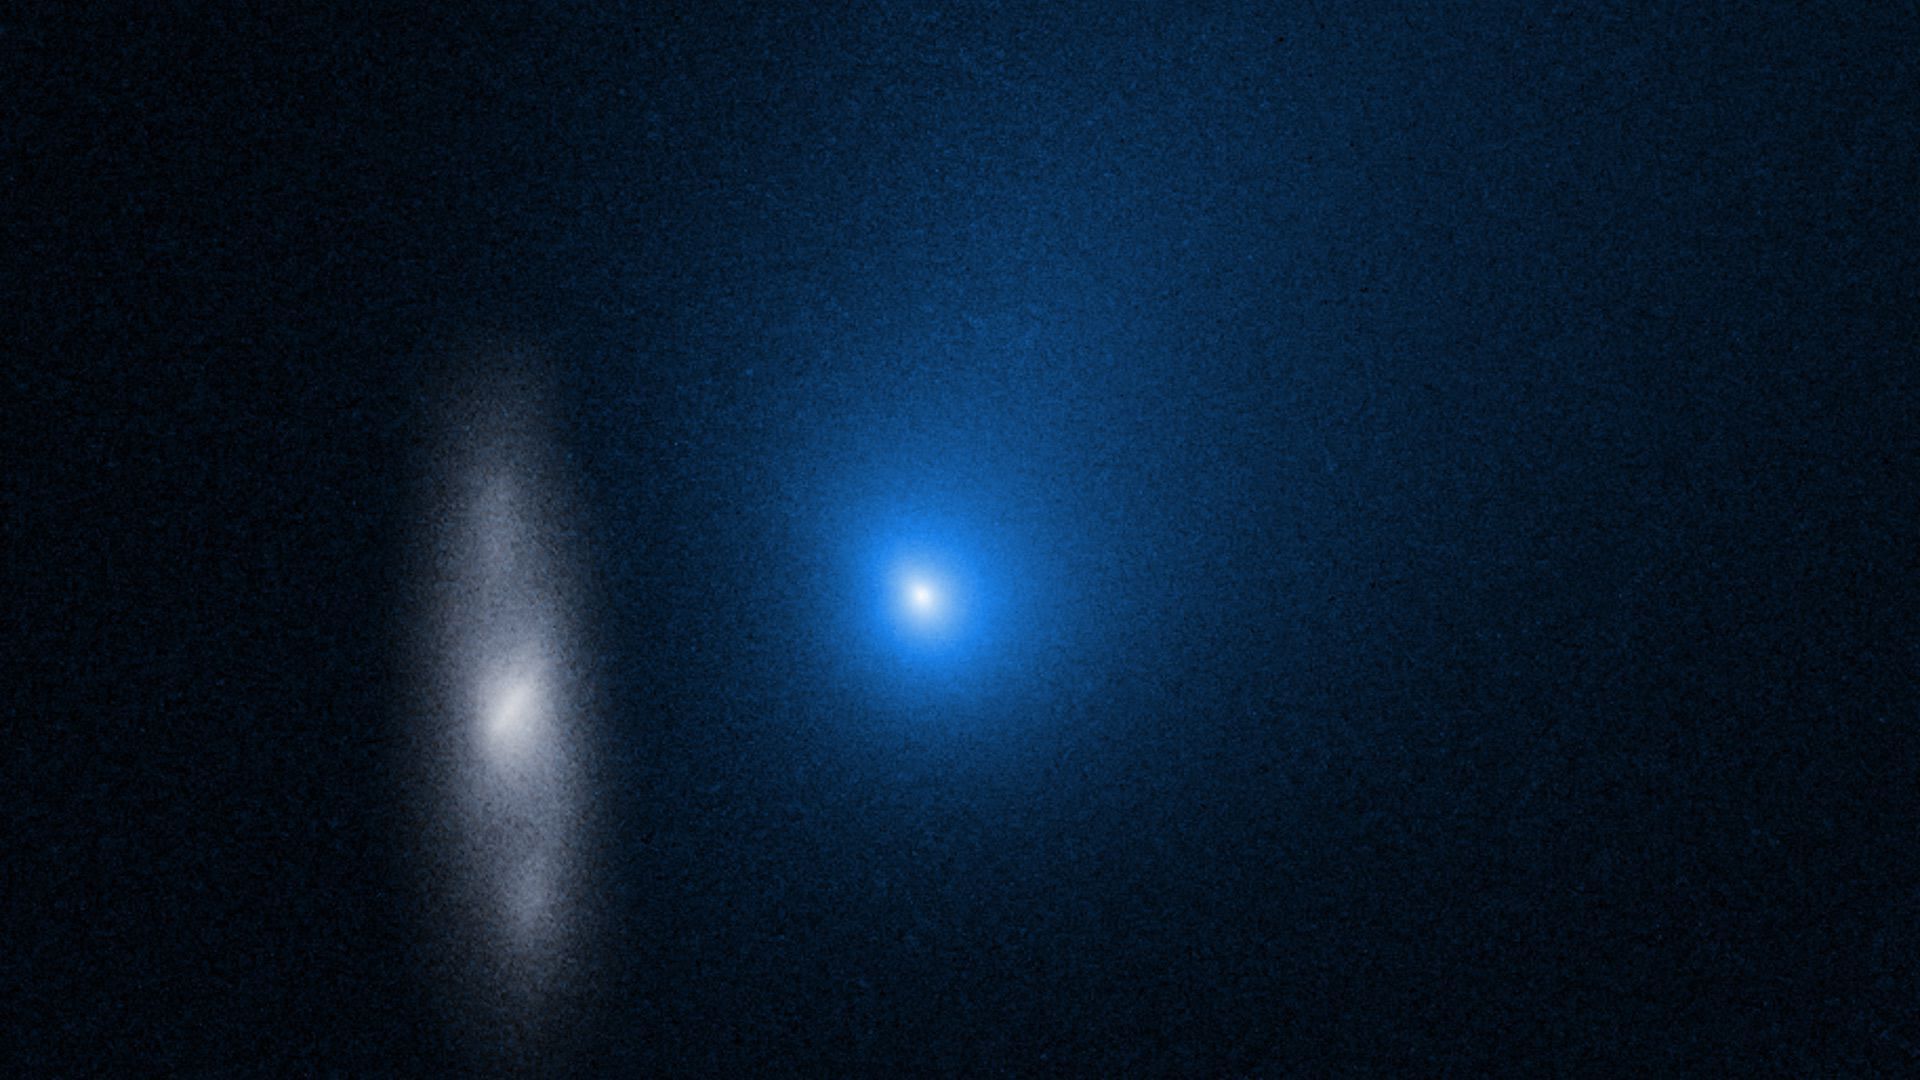 picture from hubble telescope thats a comet